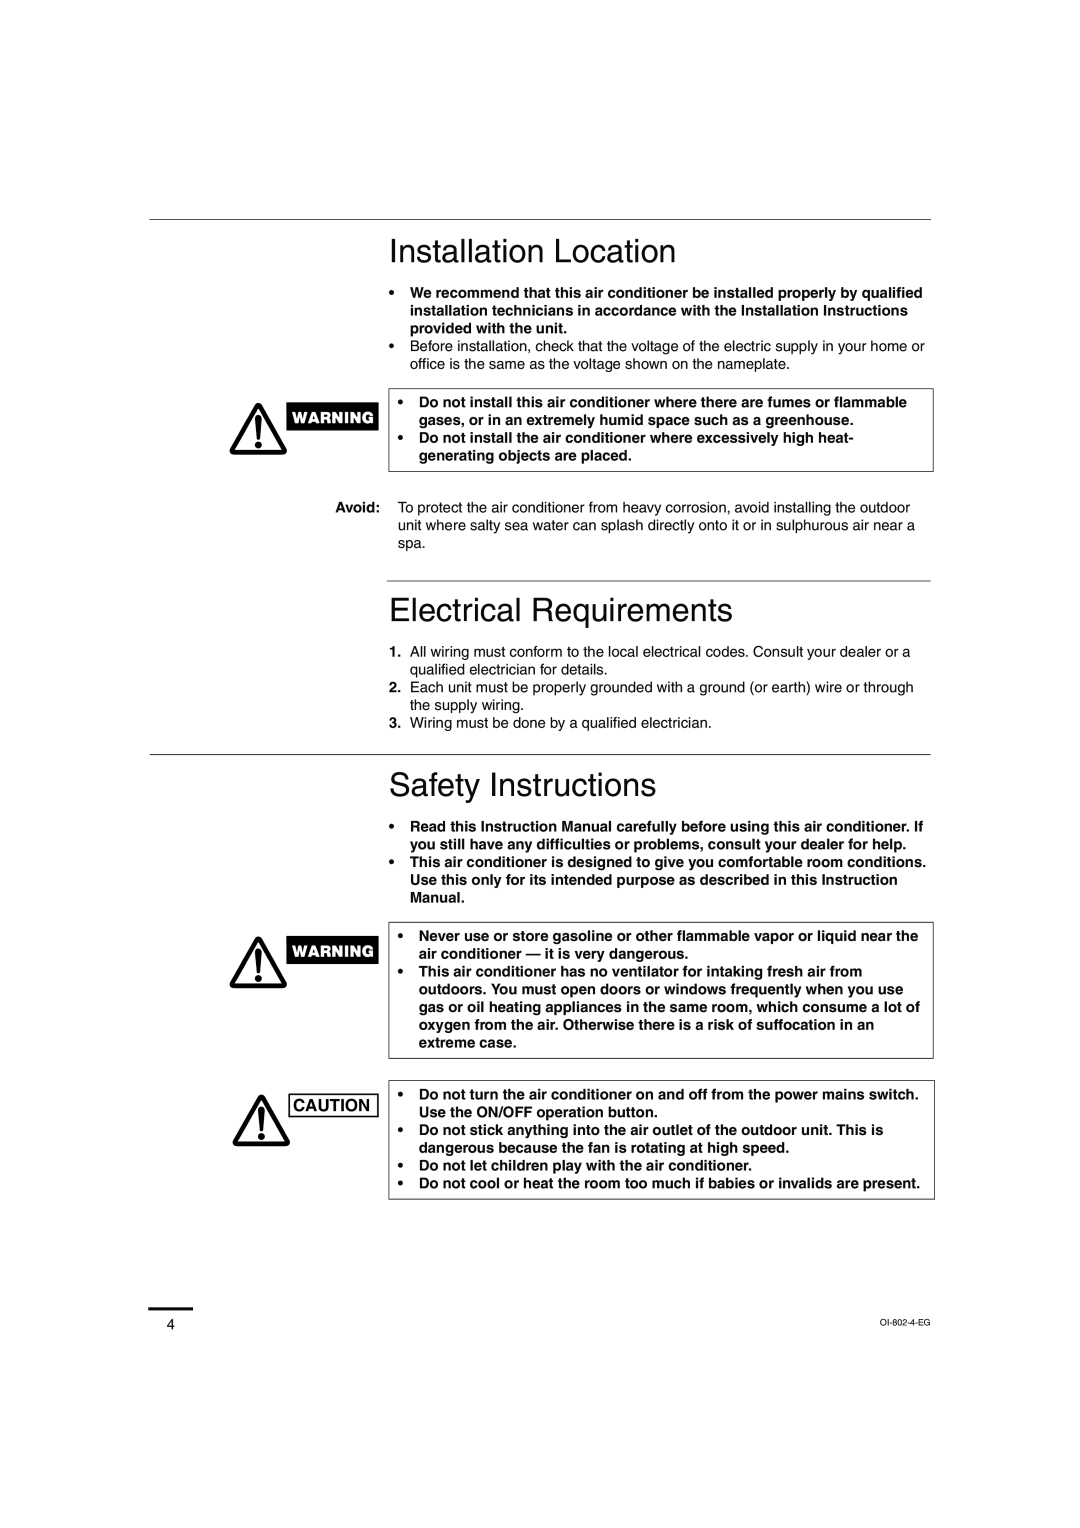 Sanyo KHS1271, KHS0971 instruction manual Installation Location, Electrical Requirements, Safety Instructions 